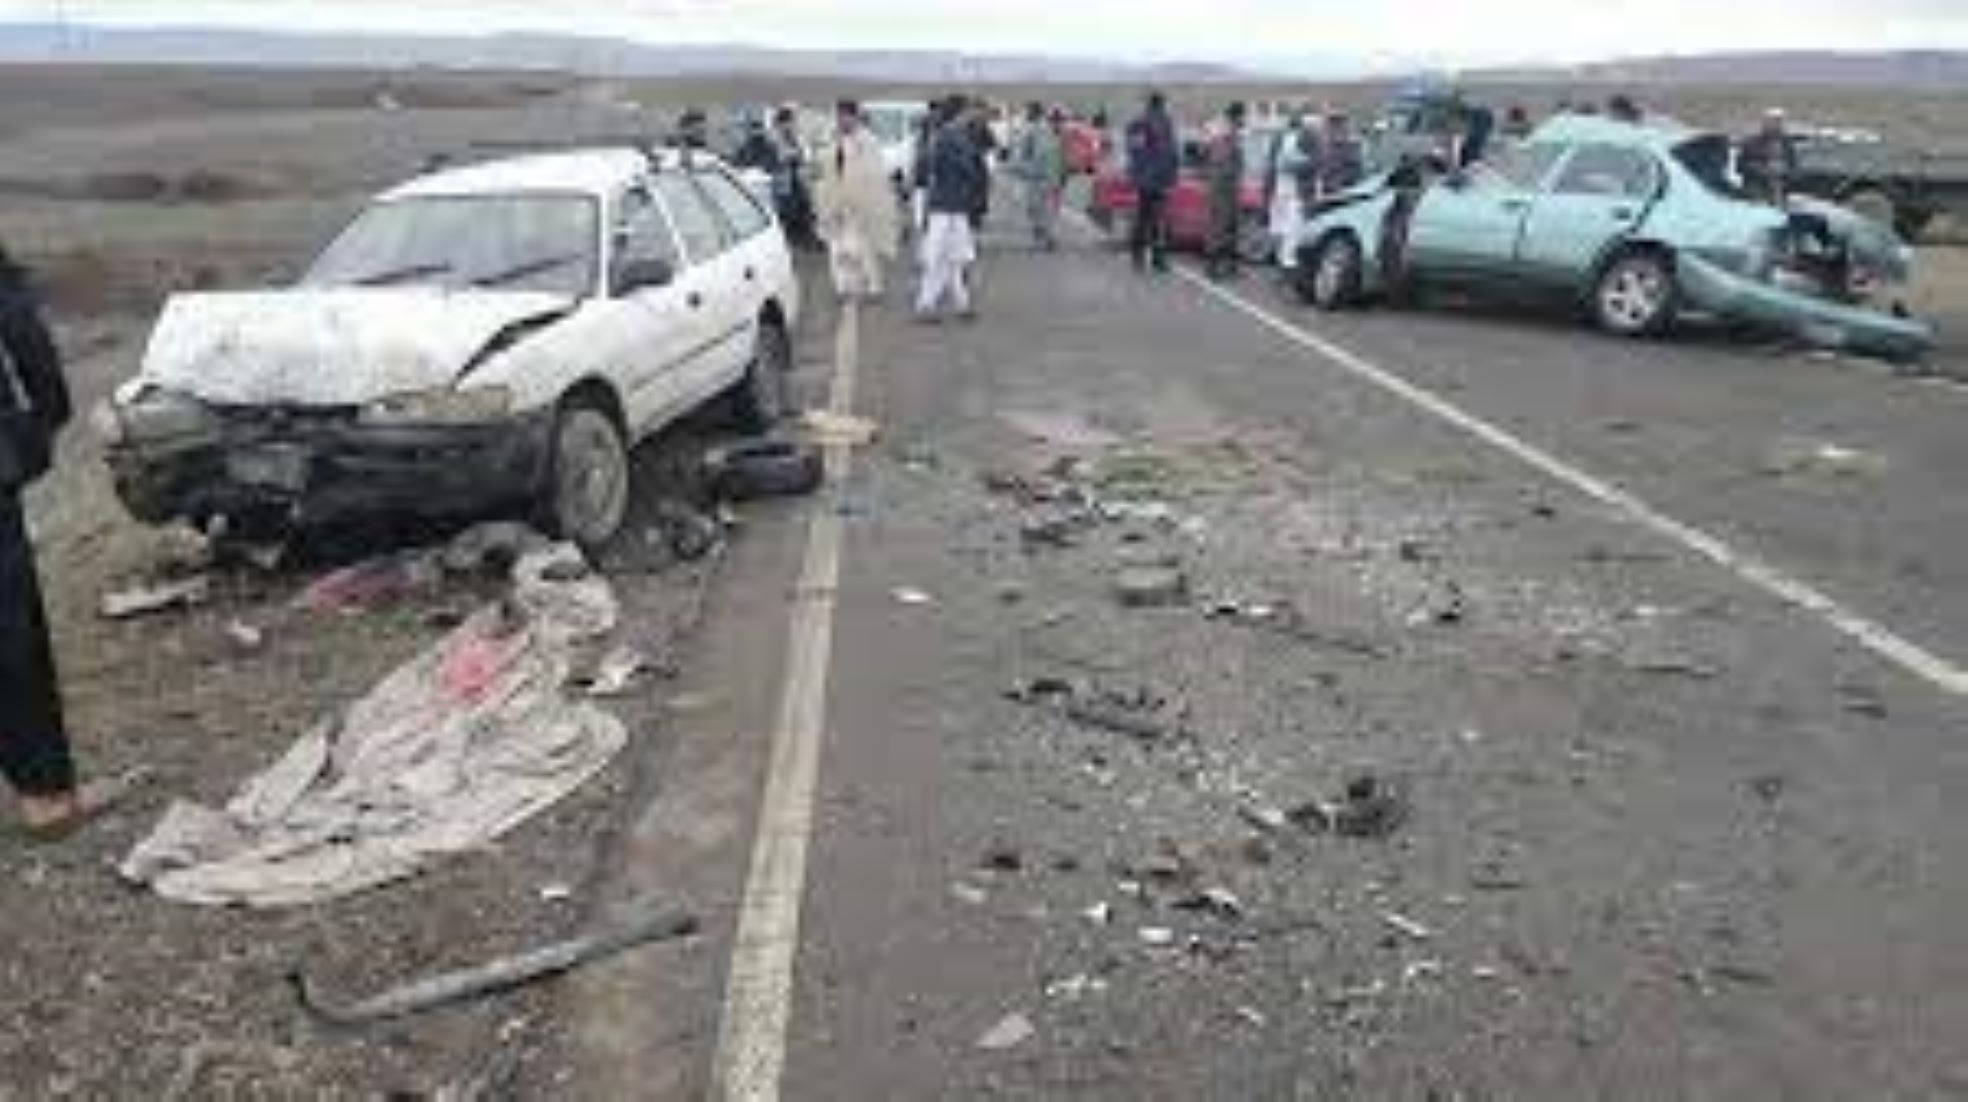 24 Injured In Three Road Accidents In Afghanistan